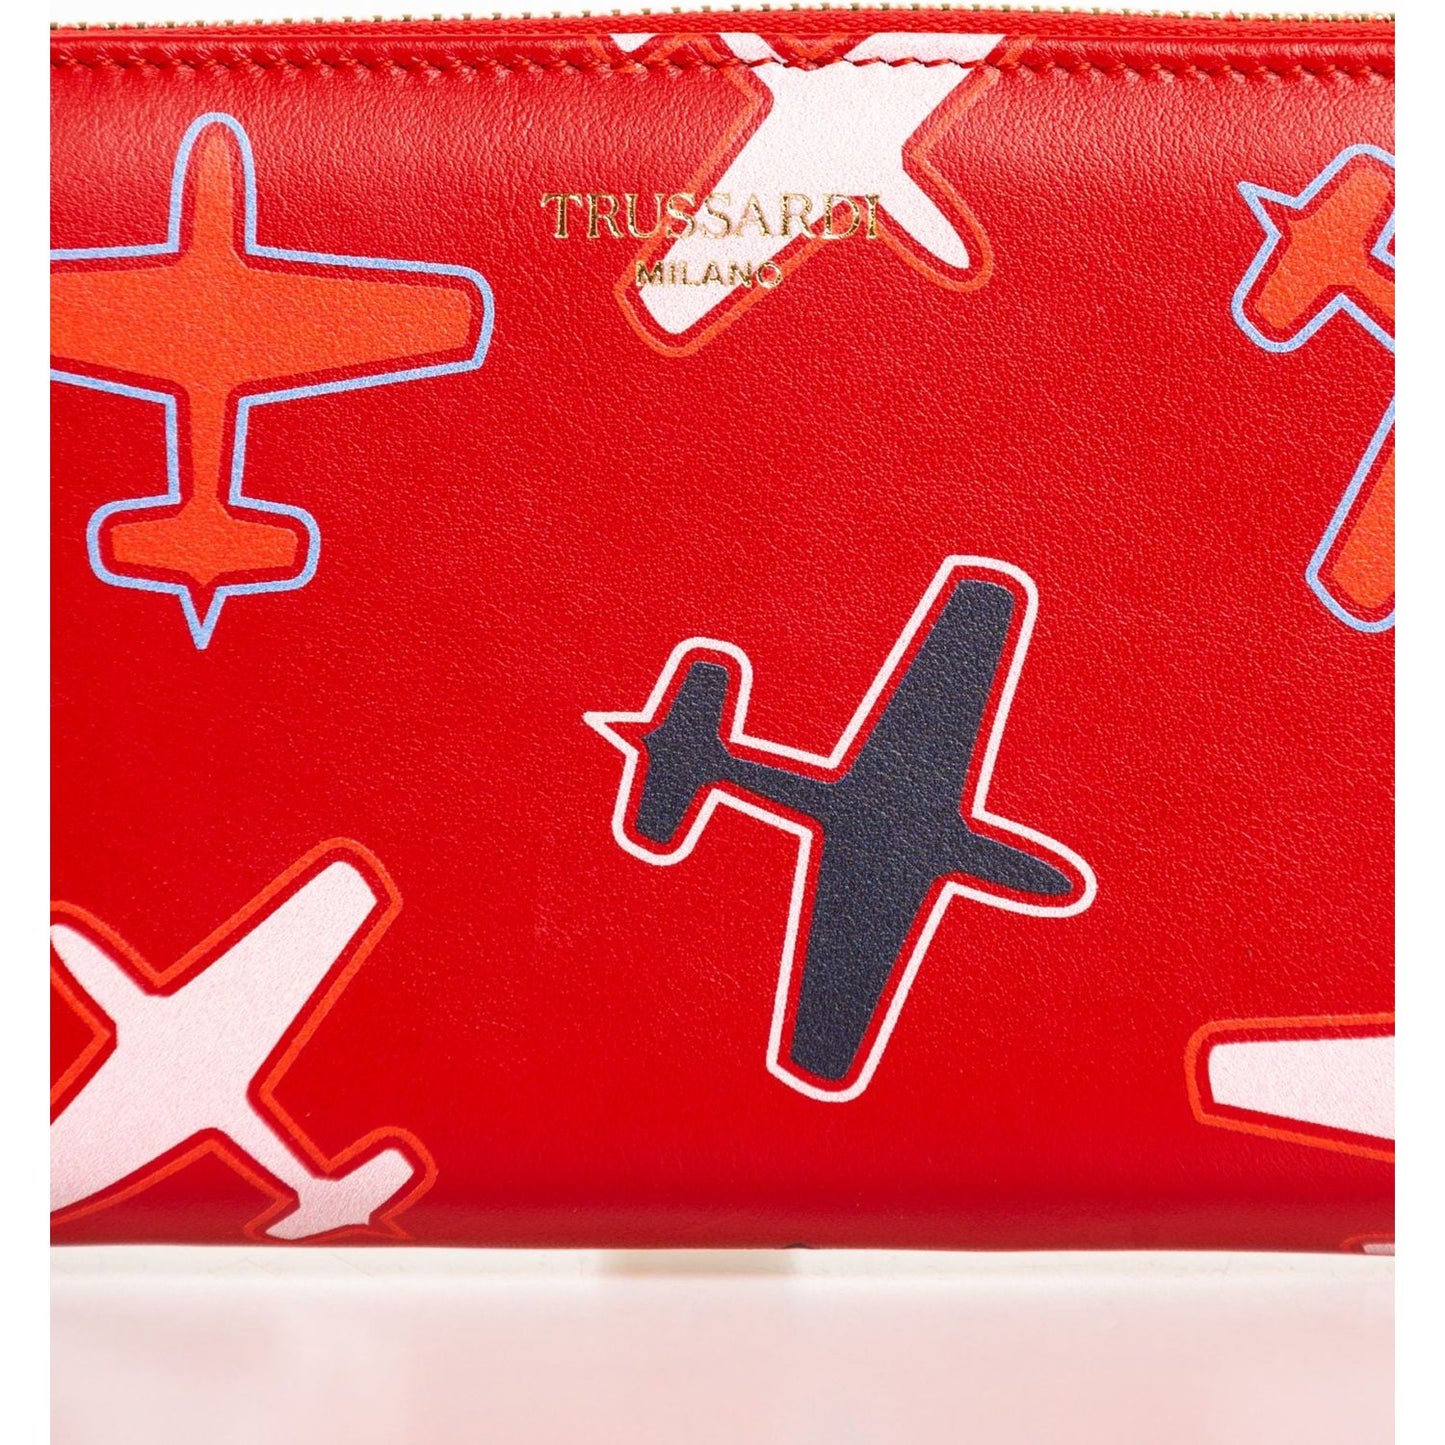 Trussardi Chic Airplane Print Red Leather Wallet red-leather-wallet stock_product_image_21559_1533471235-11-scaled-8bd045d8-2ab.jpg